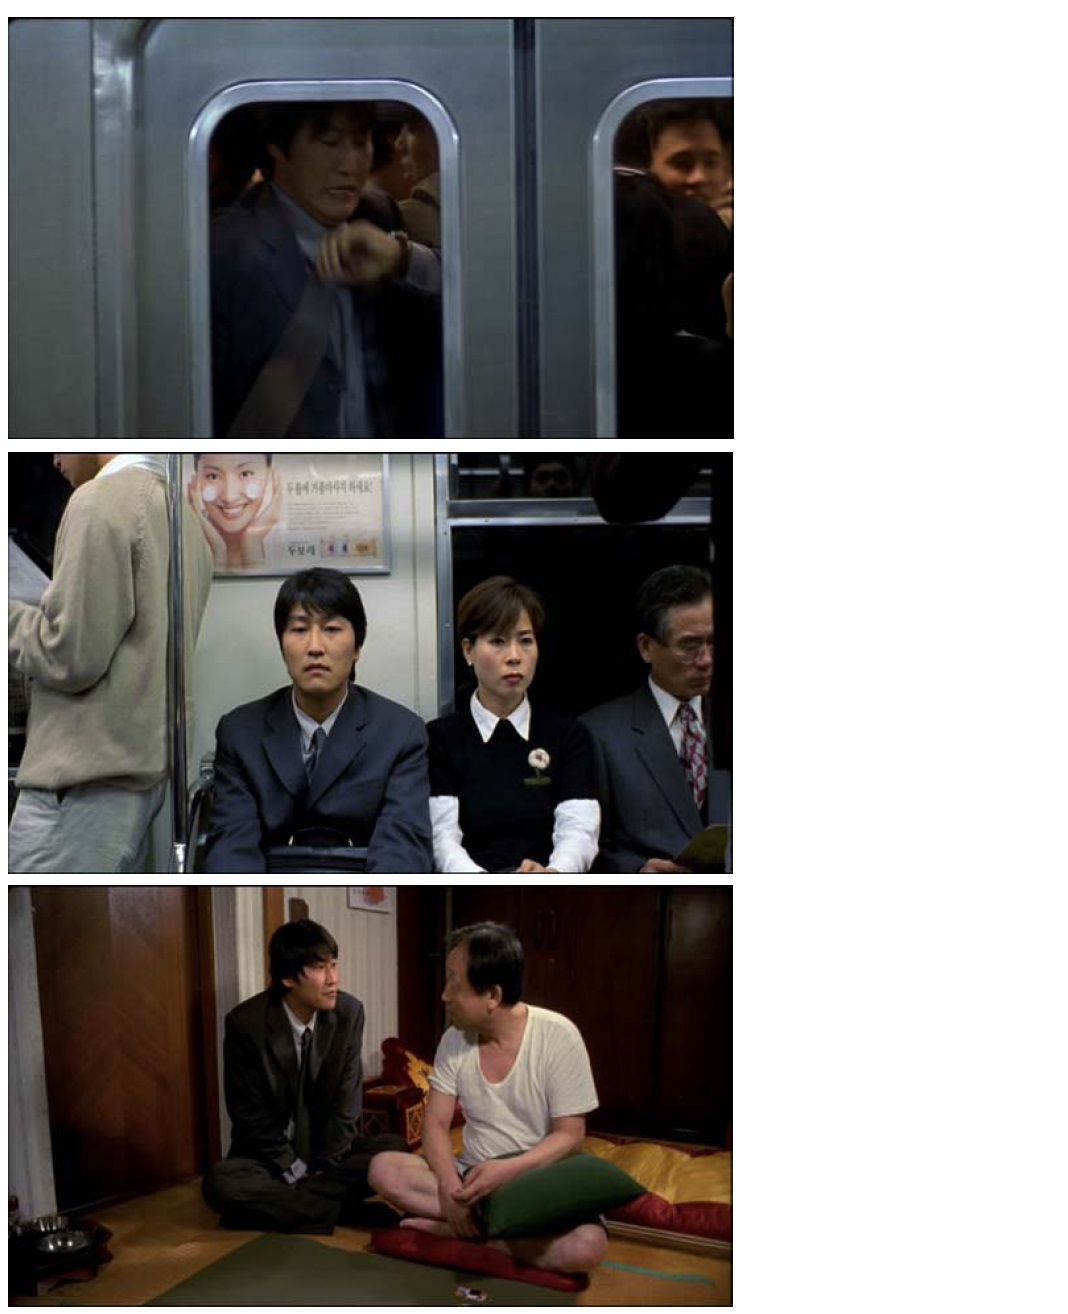 Film stills from the DVD The Foul King (2000, B.O.M. Film Productions). Top and middle: Dae-ho’s daily rush-hour commute to work on the train; bottom: Dae-ho’s father giving him a condescending lecture late at night.